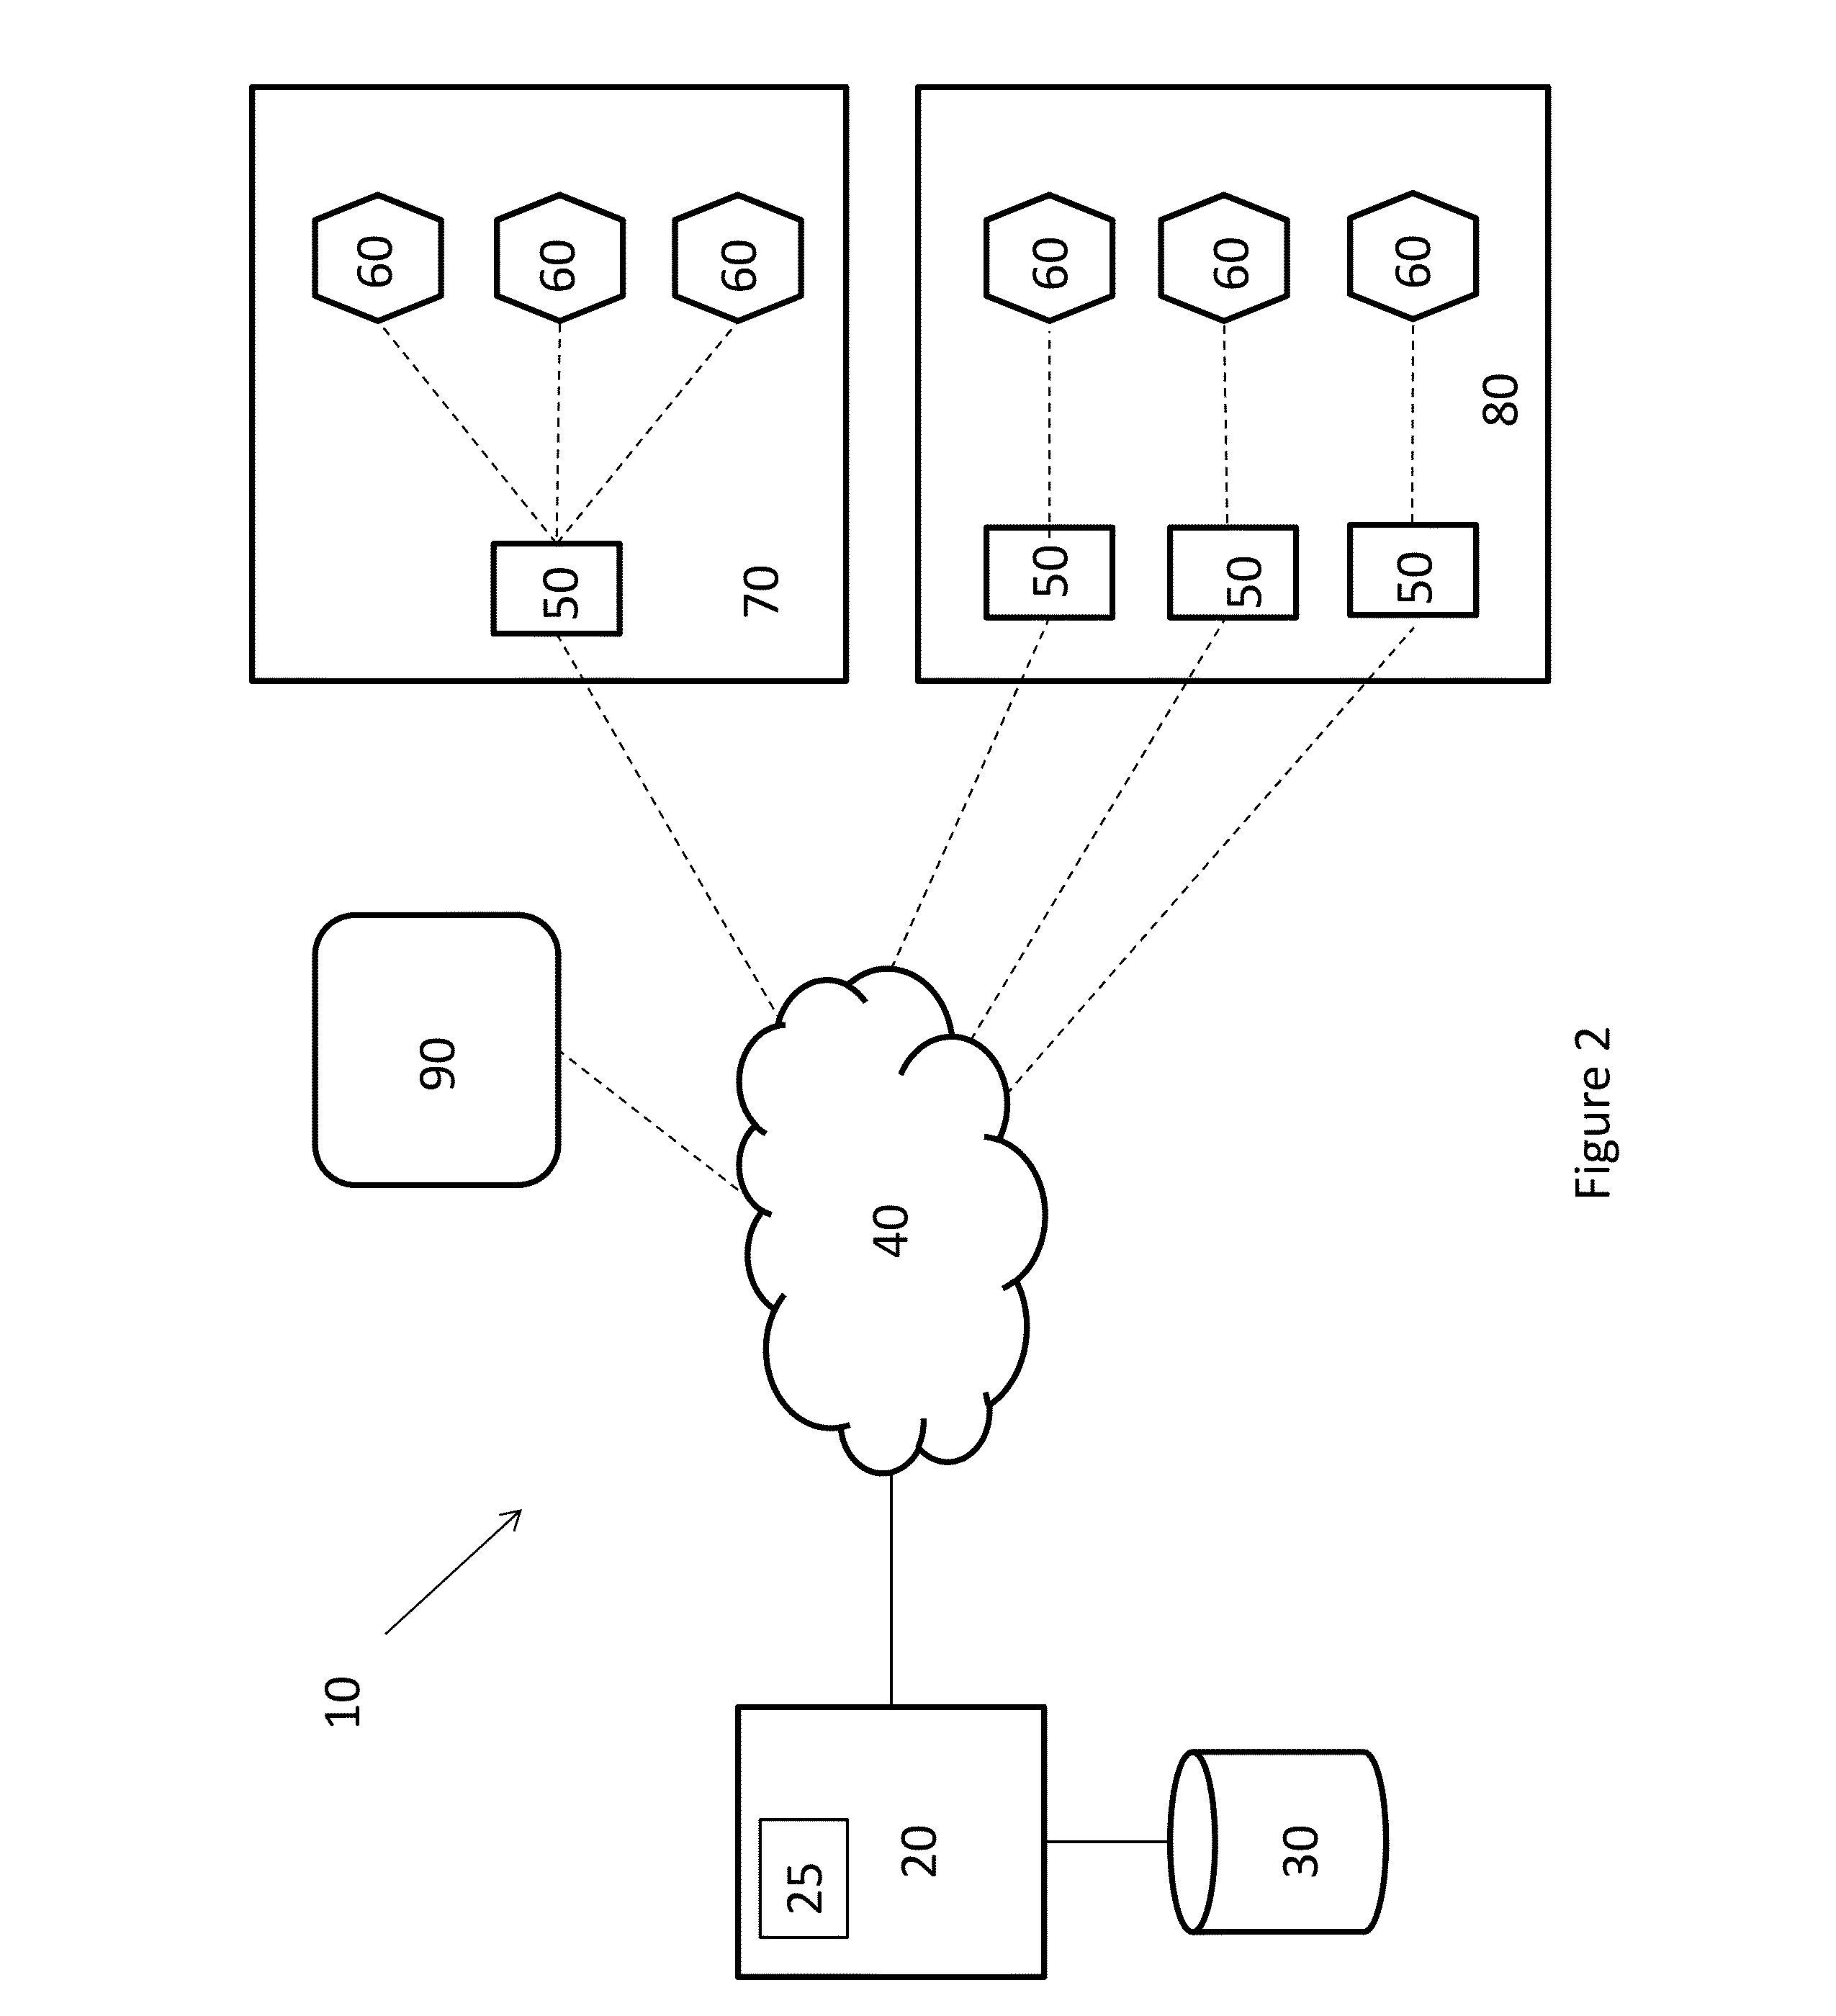 System and Method of Reviewing and Producing Documents